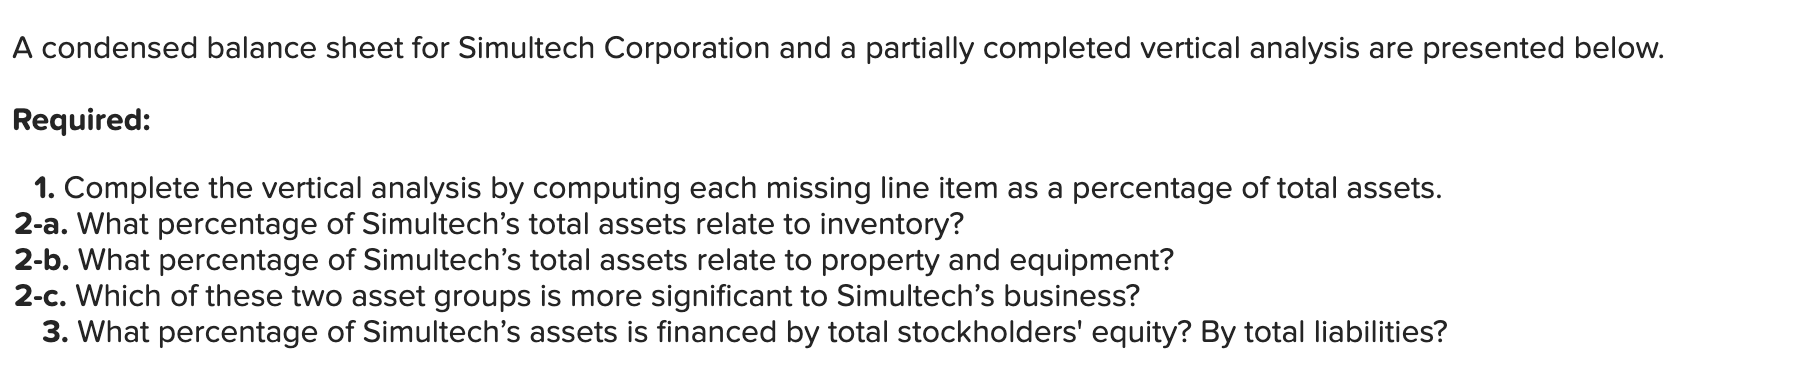 A condensed balance sheet for Simultech Corporation and a partially completed vertical analysis are presented below.Required